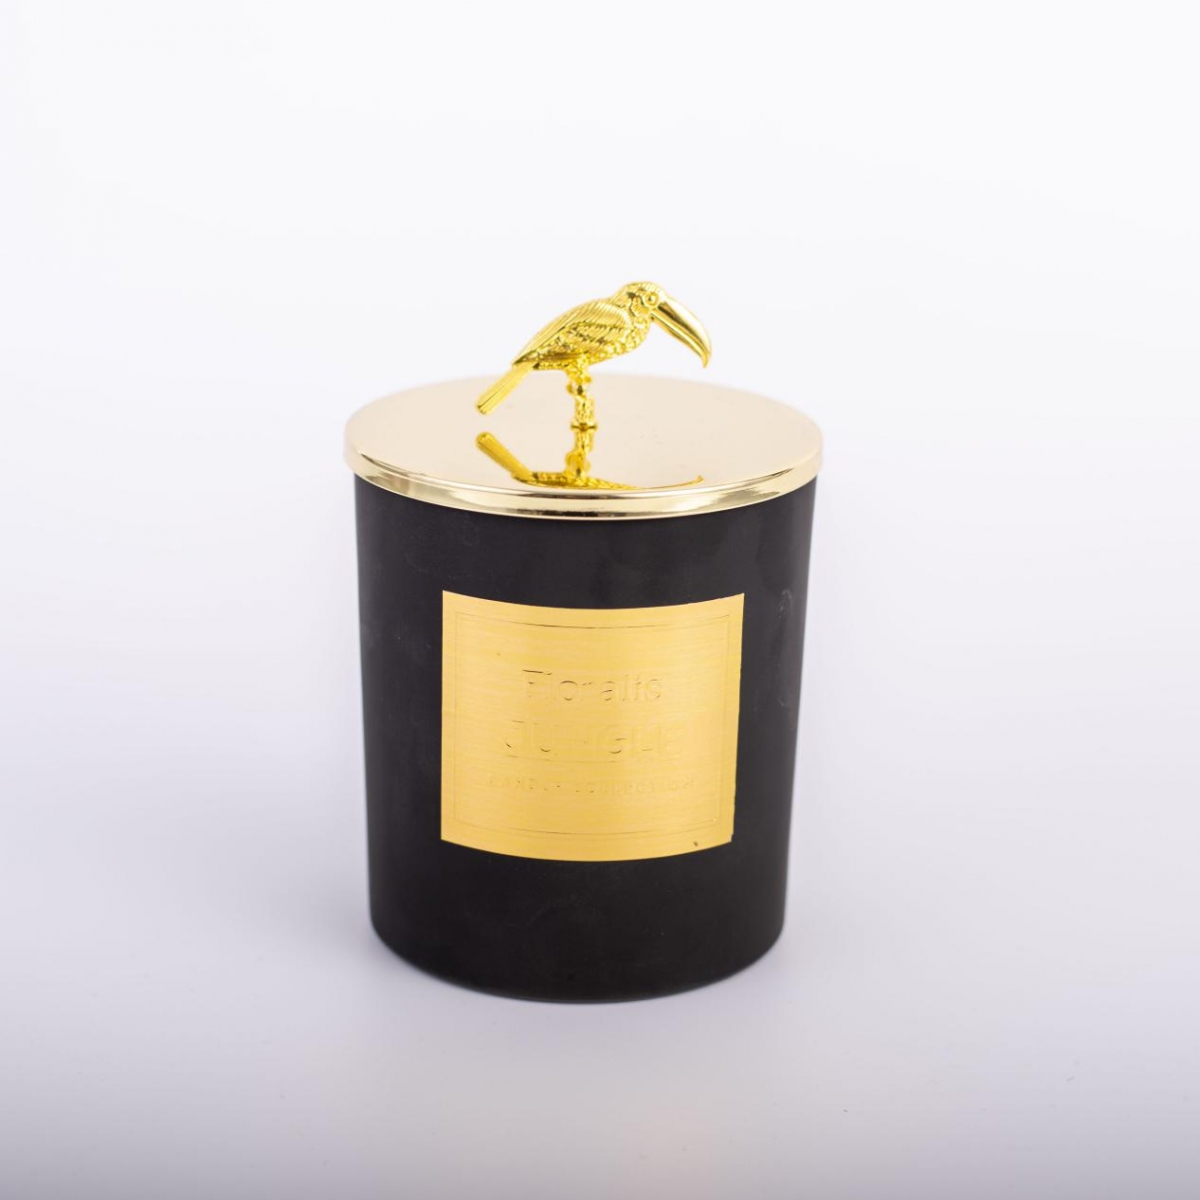 Scented Candles -Best Soy Candles ,Luxury Candles ,Vegan Candles ,Black Glass Jar ,Gold Toucans Metal Lid ,Aromatherapy ,China Factory ,Price-HOWCANDLE-Candles,Scented Candles,Aromatherapy Candles,Soy Candles,Vegan Candles,Jar Candles,Pillar Candles,Candle Gift Sets,Essential Oils,Reed Diffuser,Candle Holder,